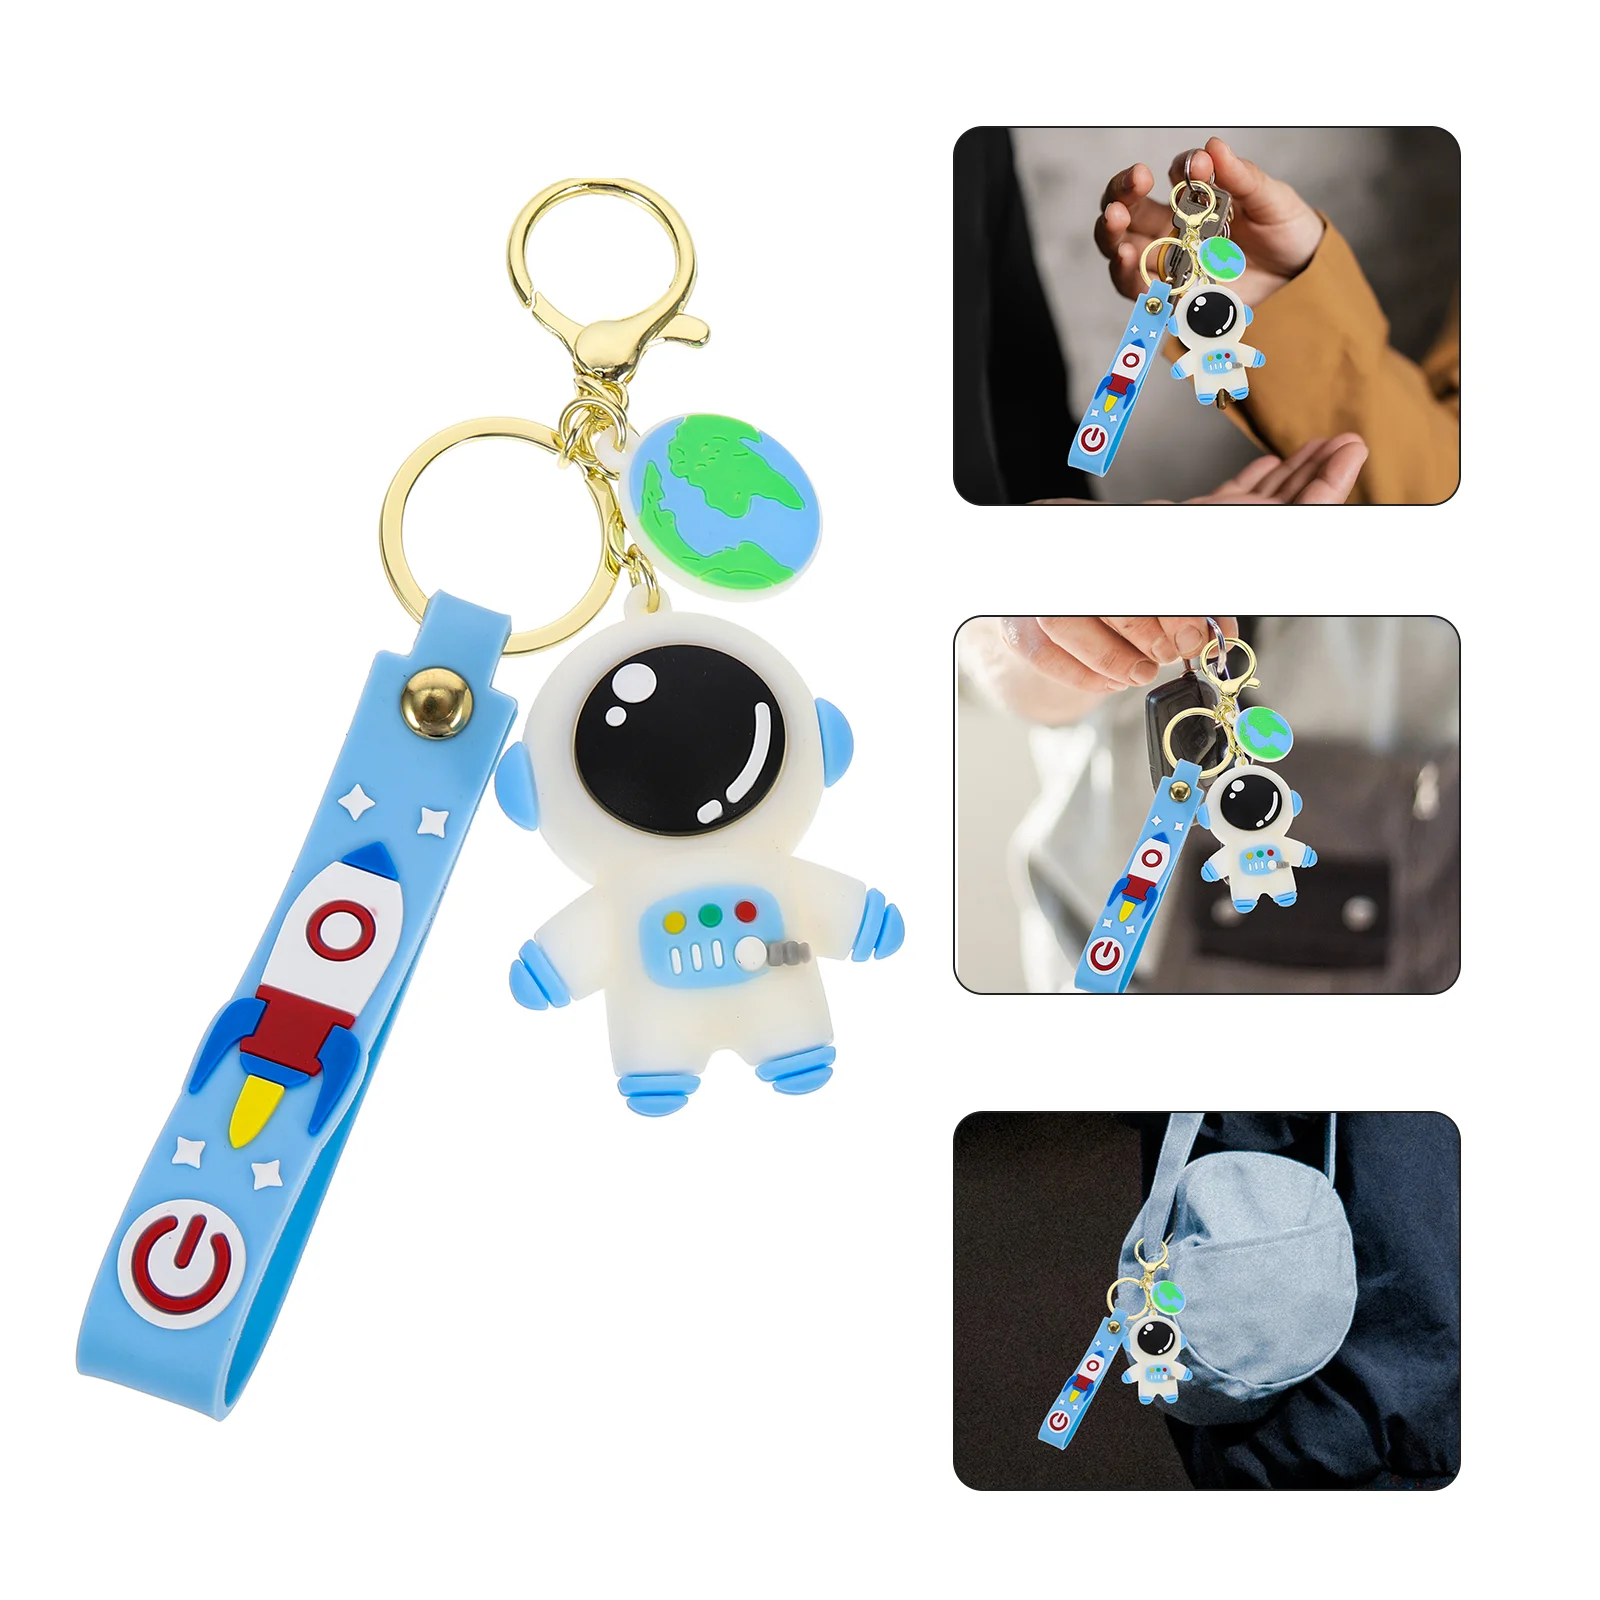 

Keychain Locator Key Astronaut Cover Holder Tag Bag Case Space Sleeve Ring Wallet Keychains Finder Spaceman Backpack Tracer